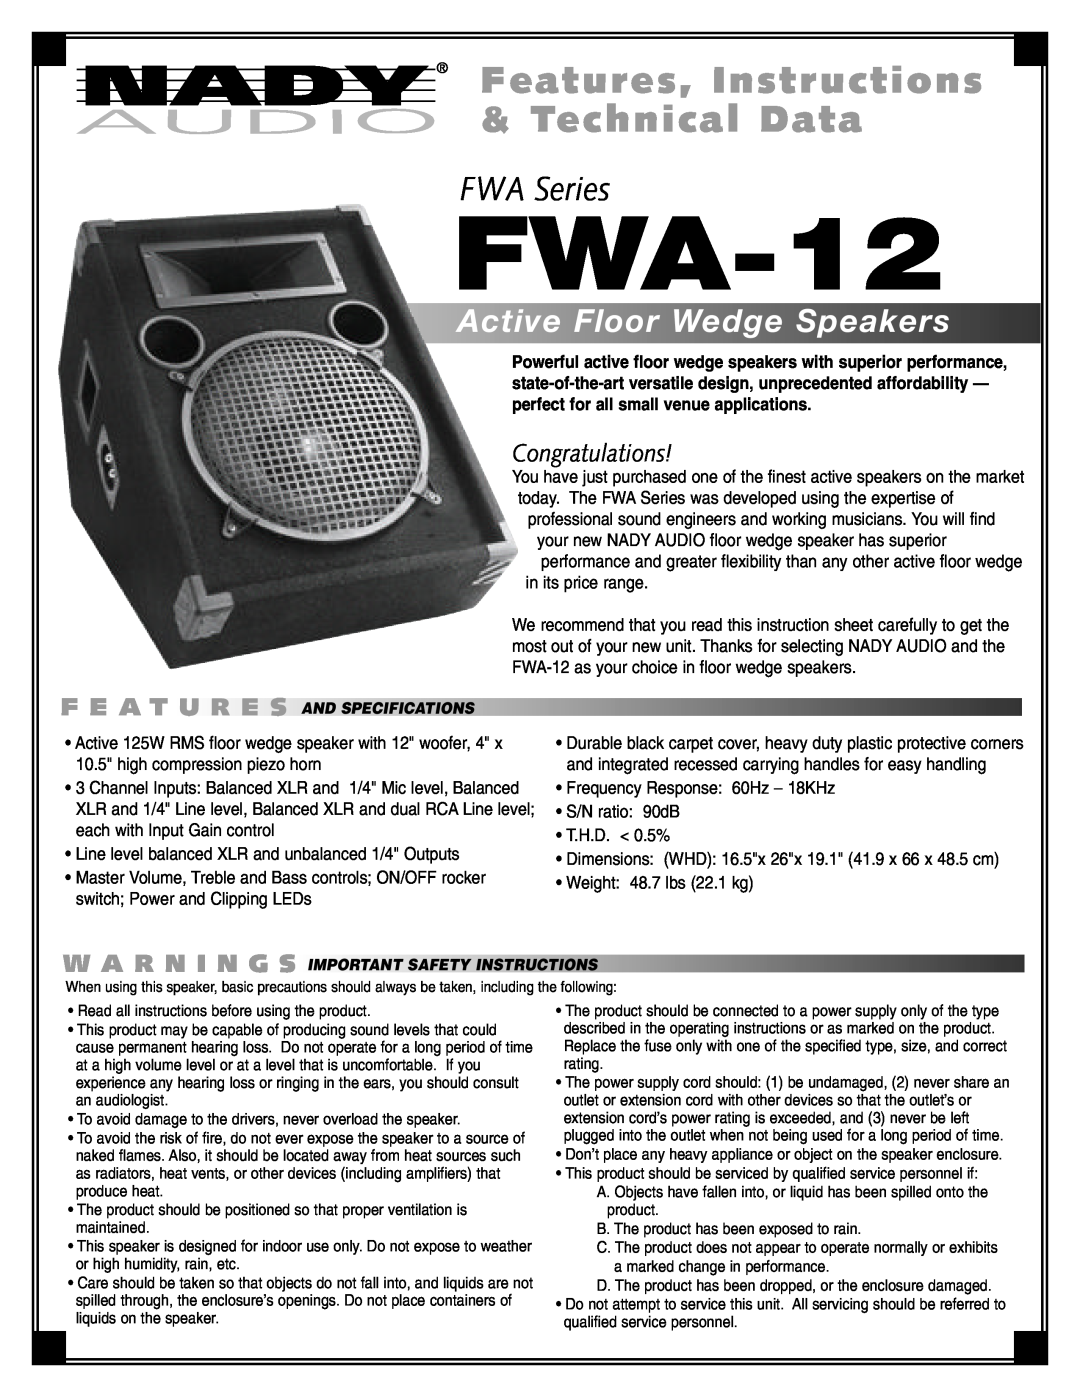 Nady Systems FWA12 instruction sheet FWA-12, Features, Instructions & Technical Data, FWA Series, ActiveFloorWedgeSpeakers 